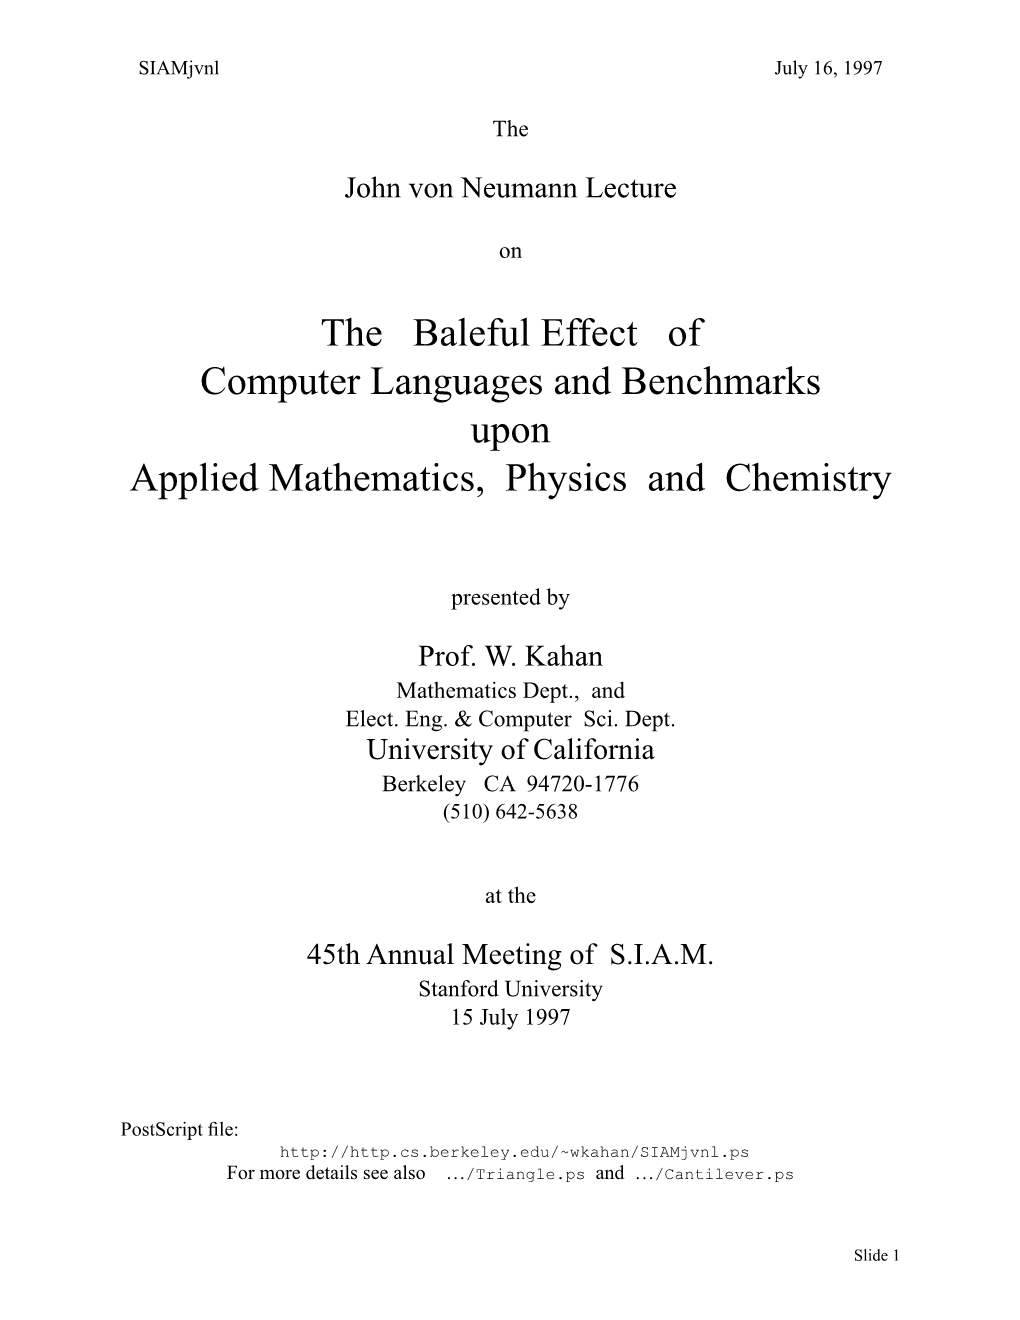 The Baleful Effect of Computer Languages and Benchmarks Upon Applied Mathematics, Physics and Chemistry